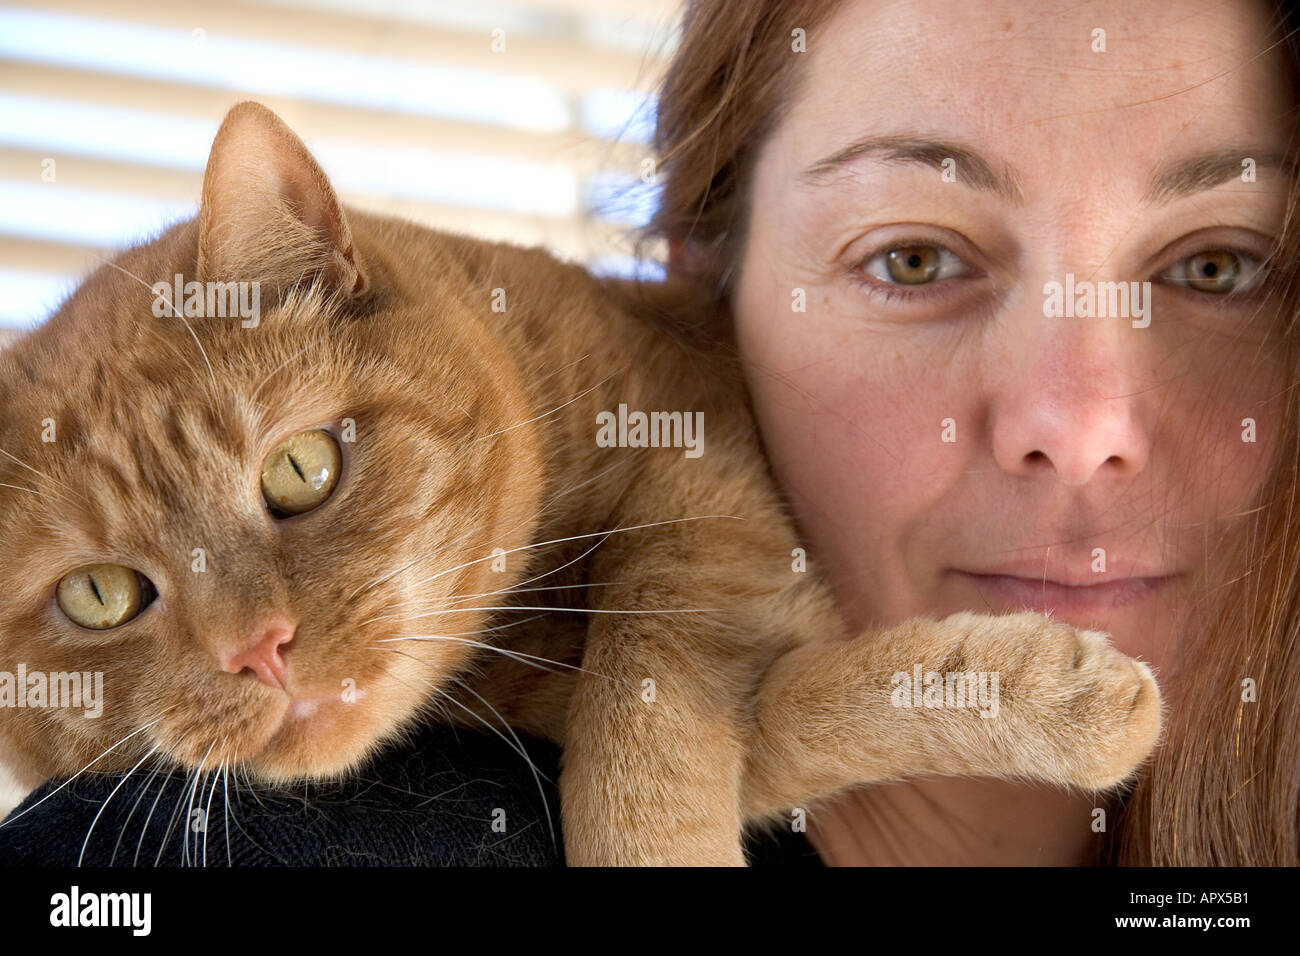 Stock Photo - portrait of woman with a pet ginger cat Model released - portrait-of-woman-with-a-pet-ginger-cat-model-released-APX5B1